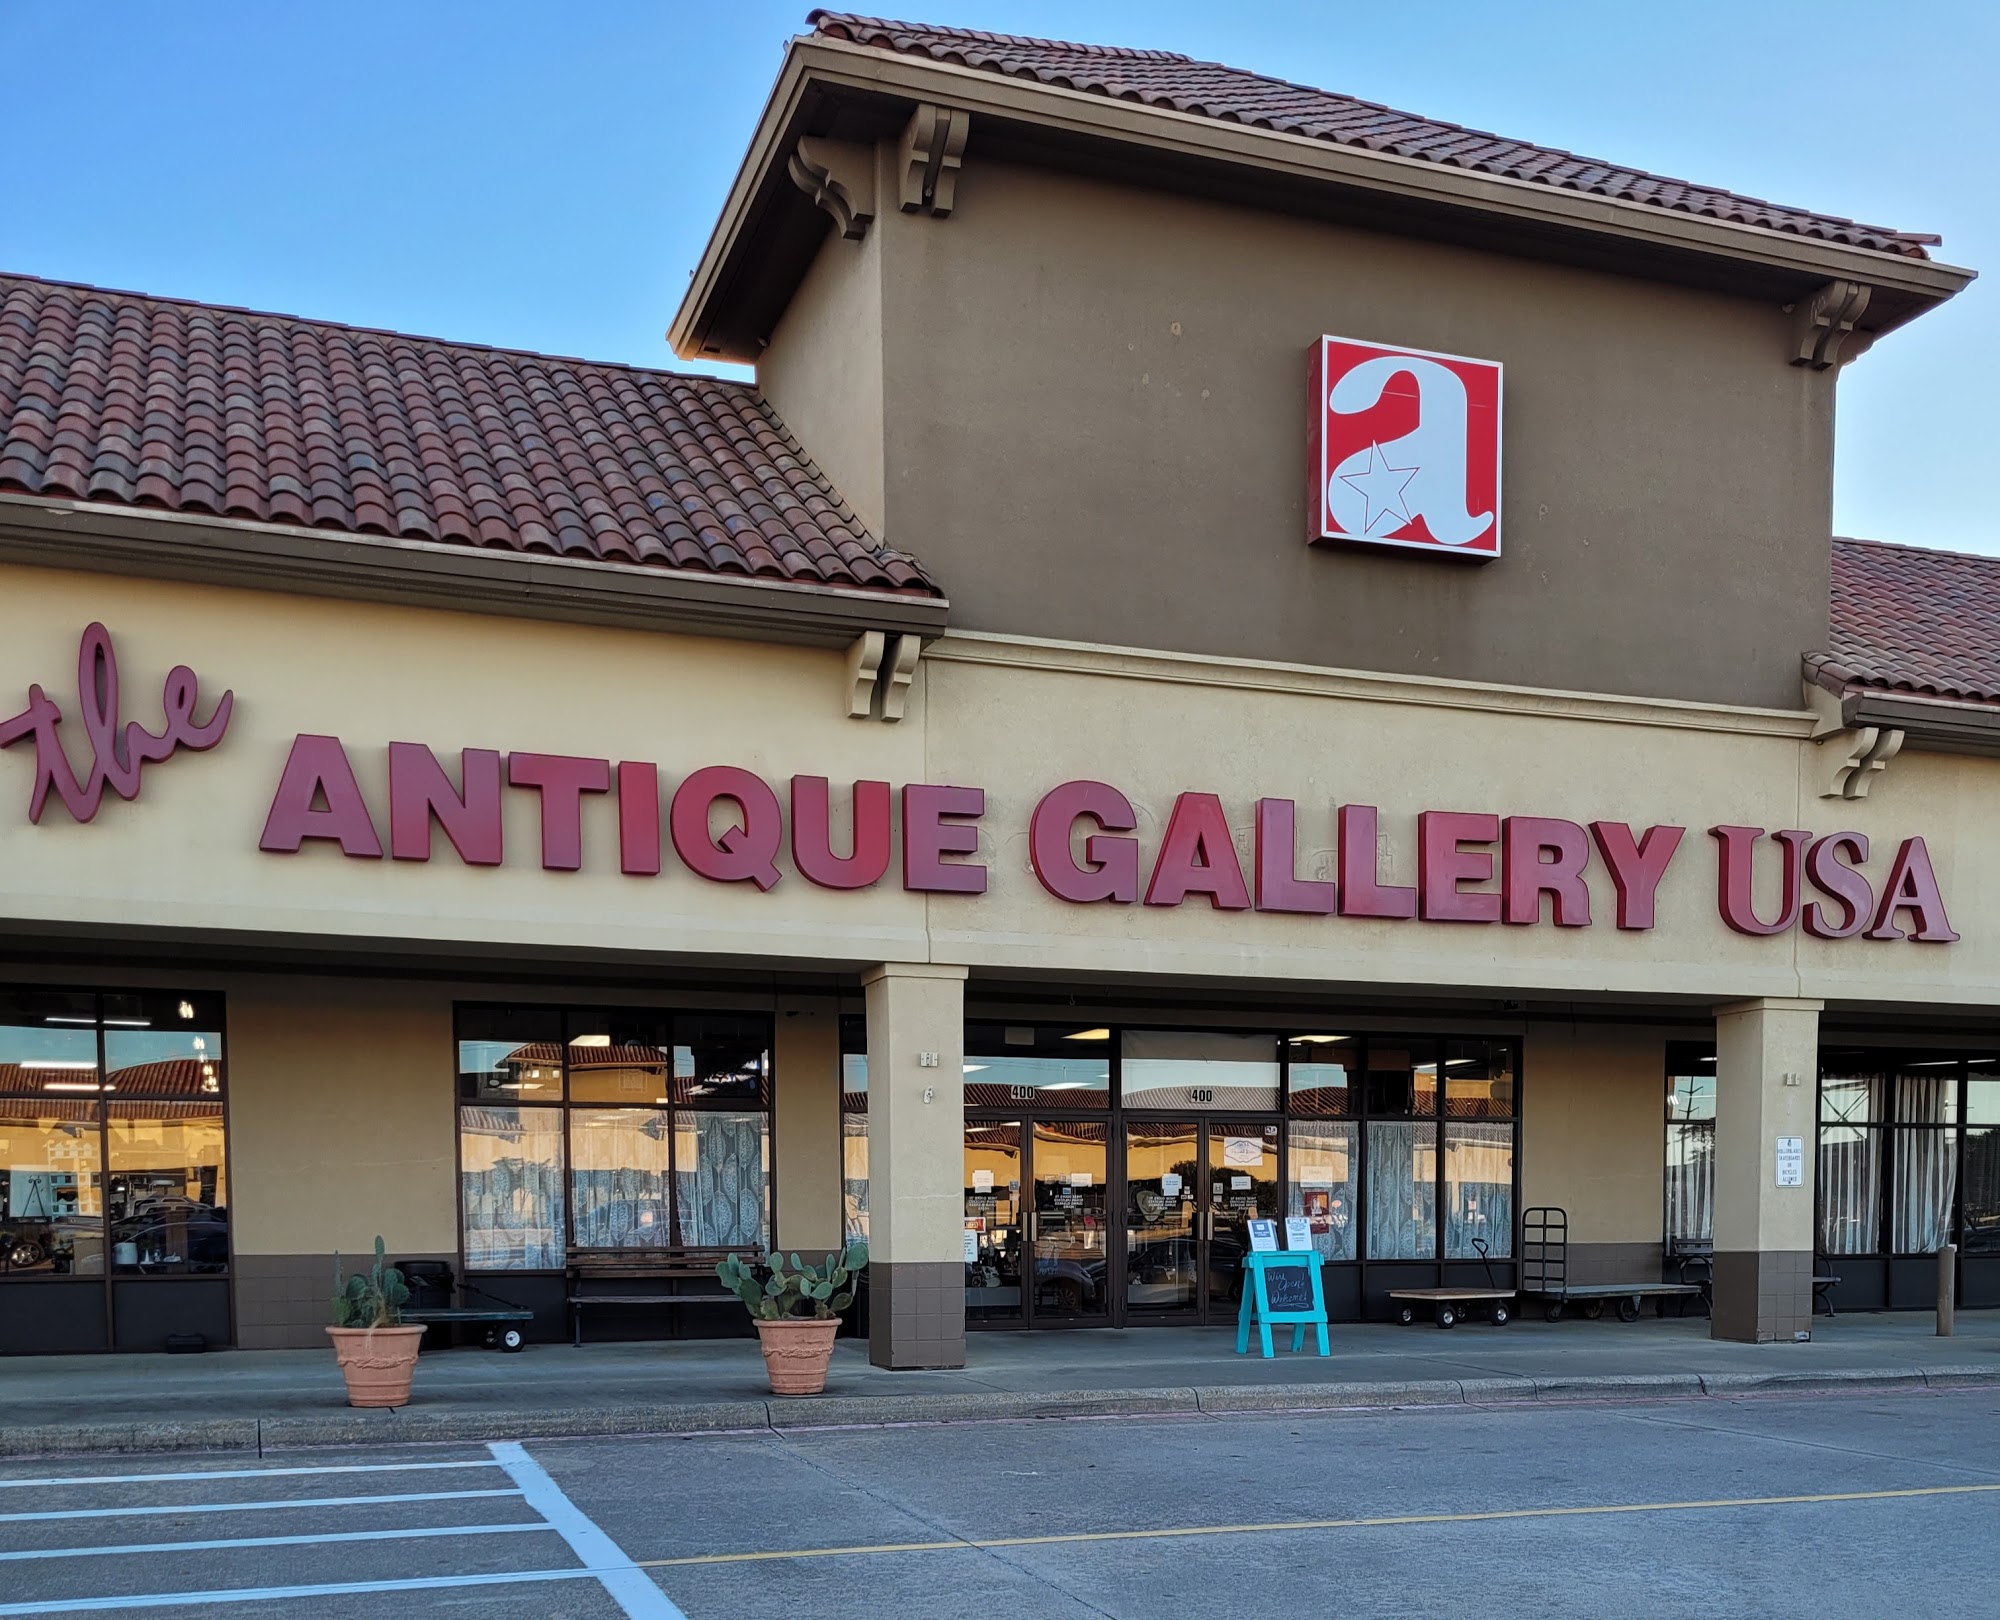 The Antique Gallery